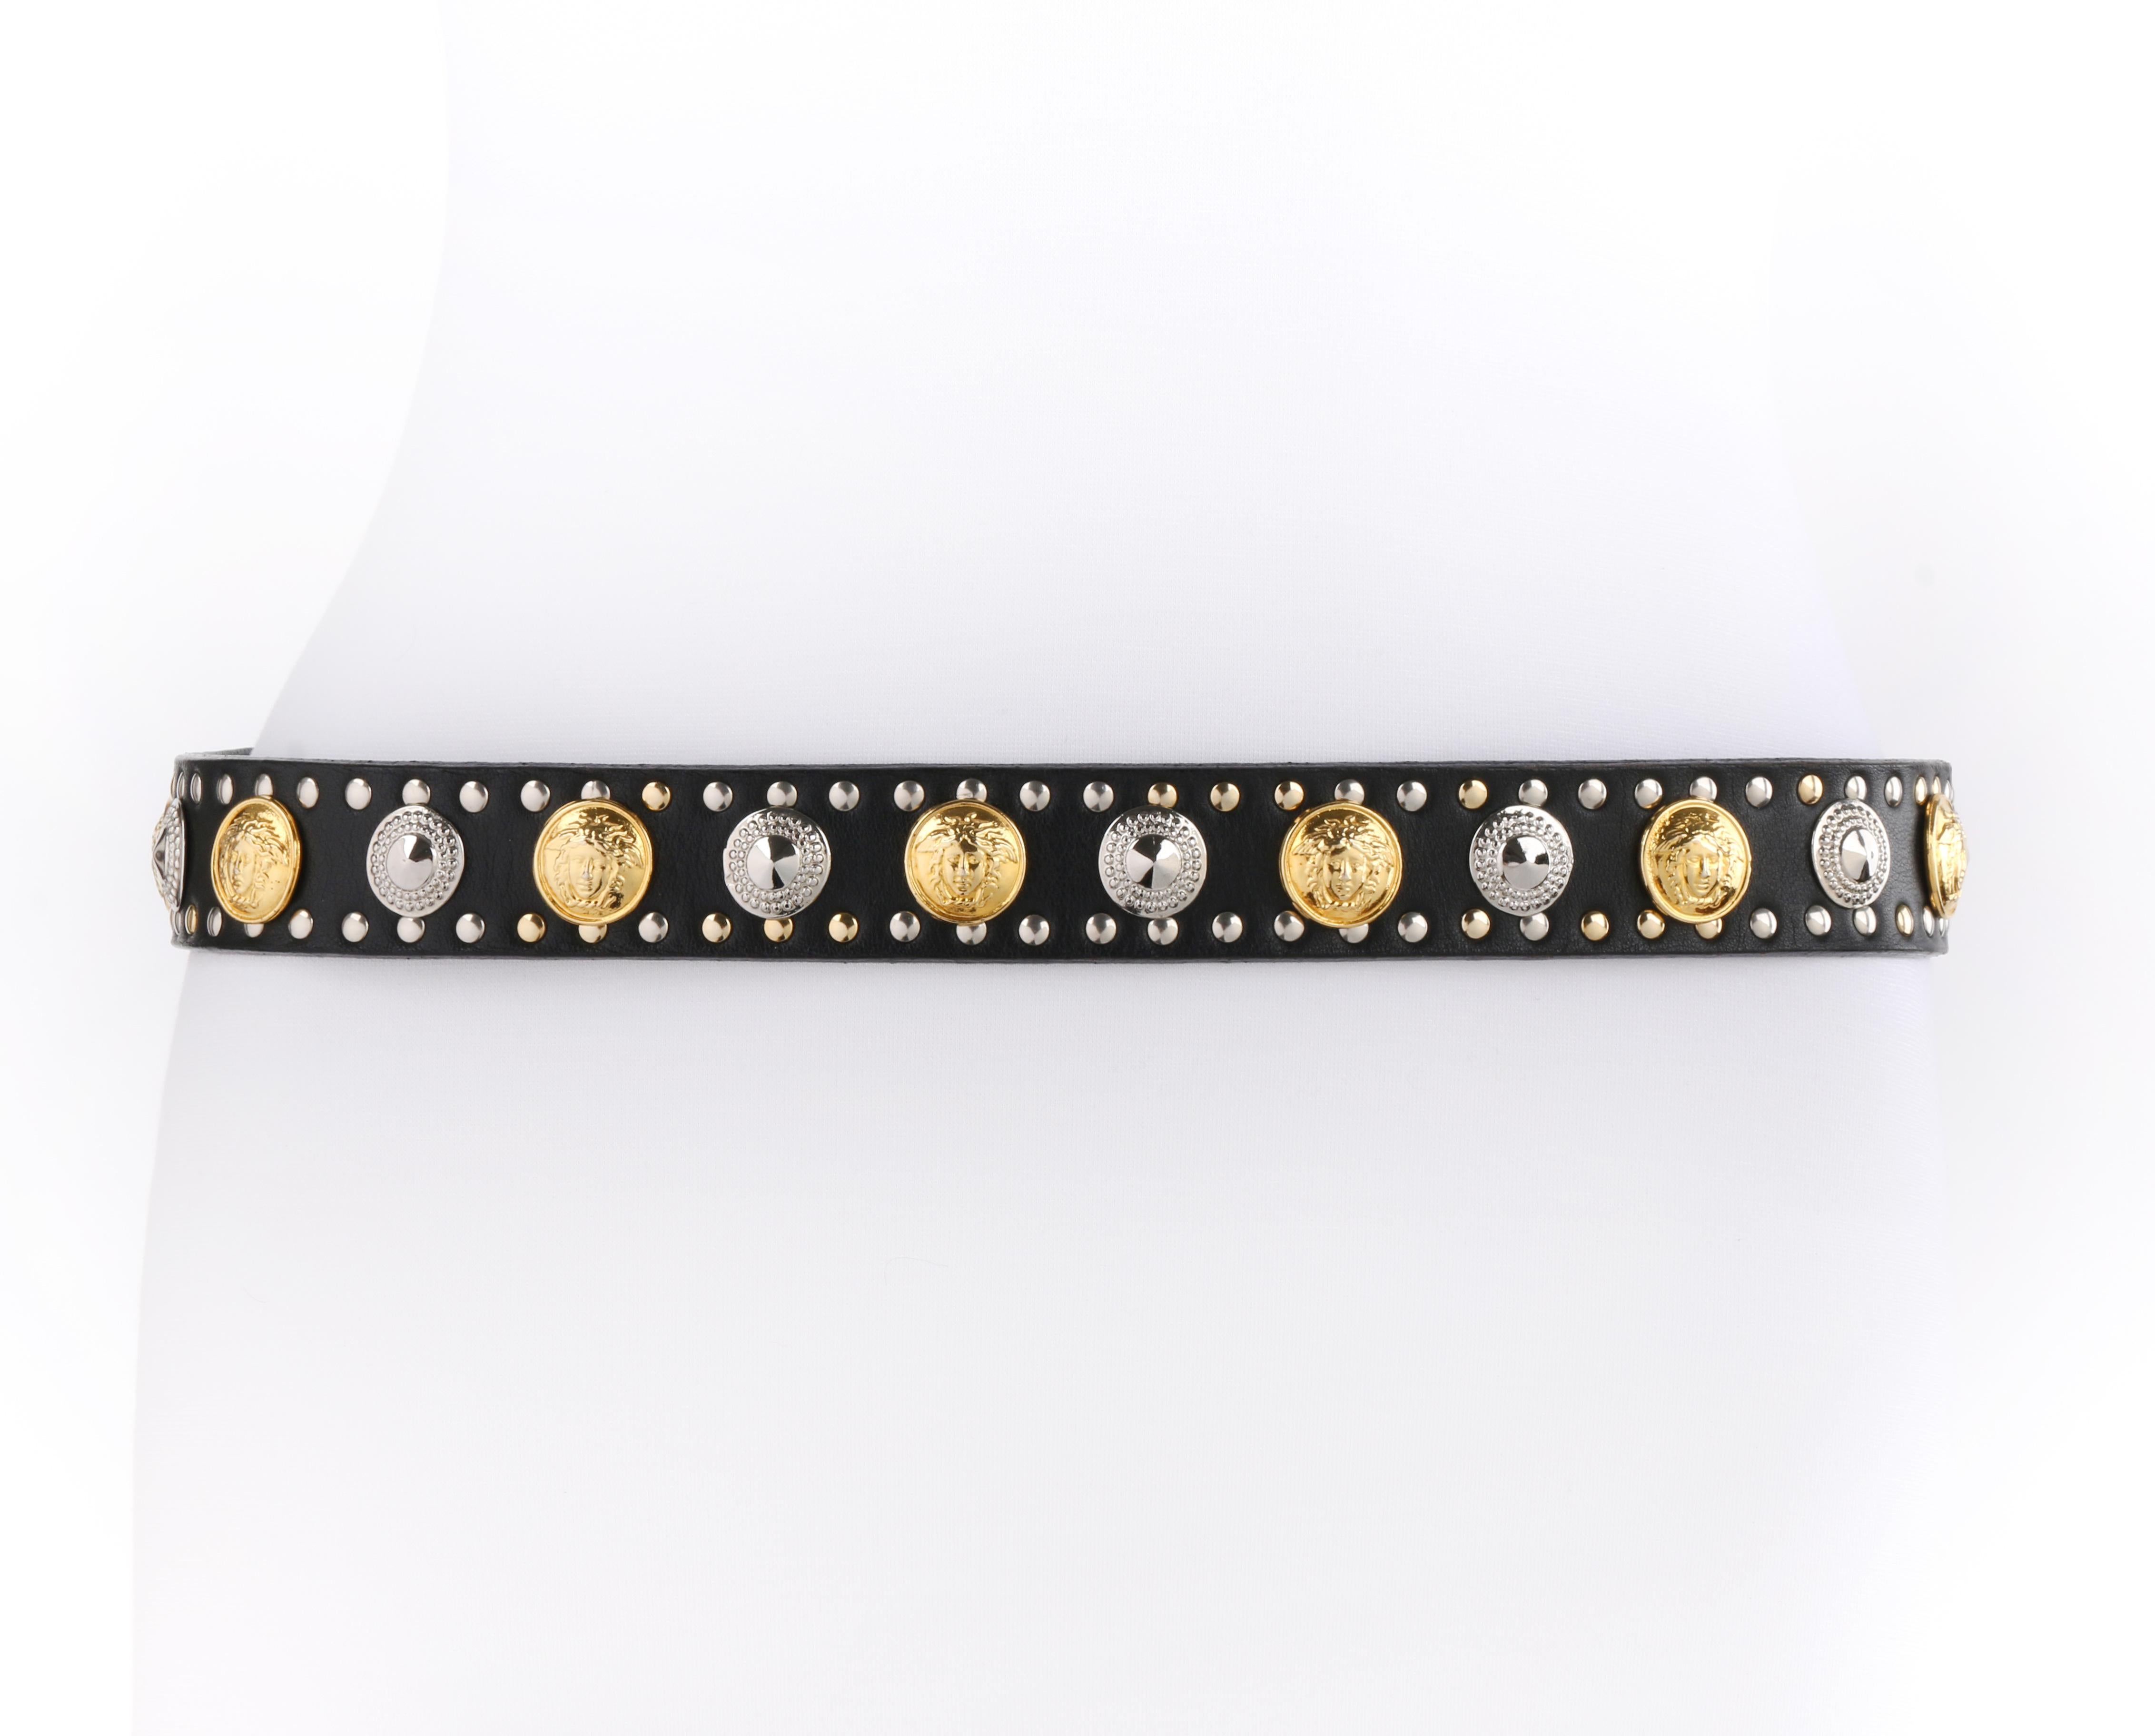 GIANNI VERSACE c.1990 Black Leather Gorgon Medusa Medallion Studded Waist Belt
 
Circa: 1990’s 
Label(s): Gianni Versace
Designer: Gianni Versace
Style: Waist belt
Color(s): Black (belt), shades of gold and silver (hardware)
Lined: Yes
Unmarked